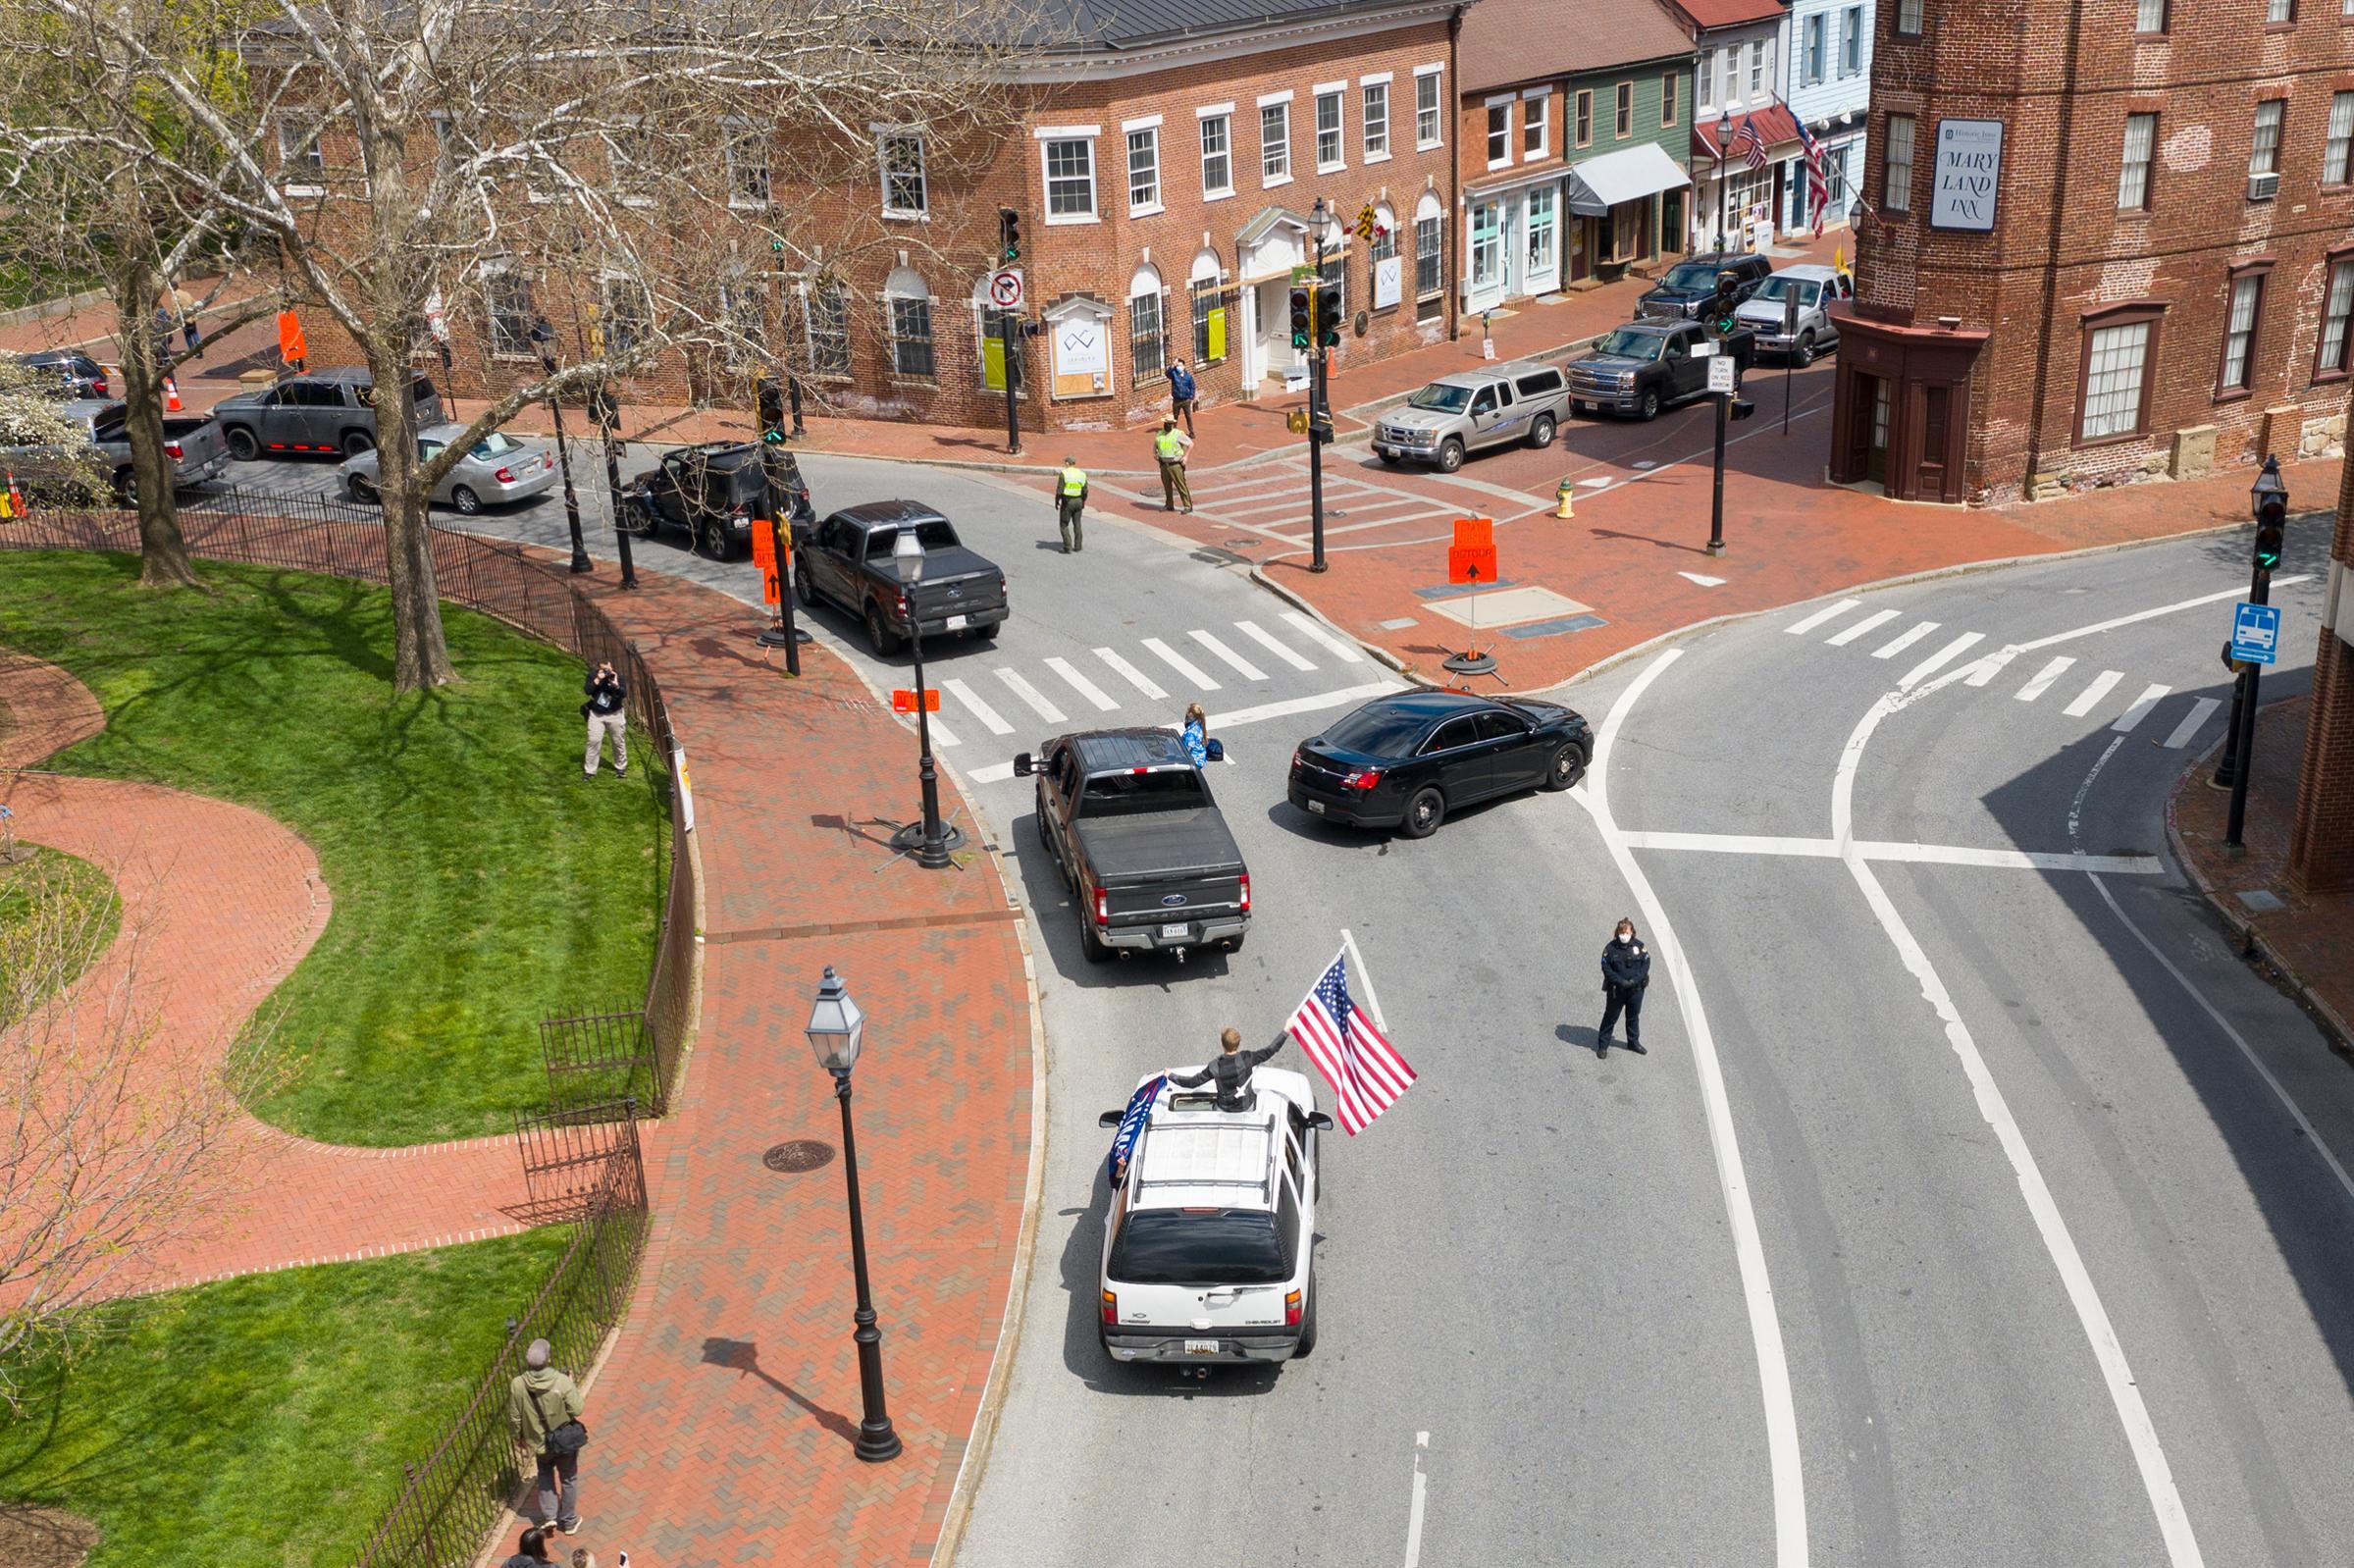 2020. USA. Annapolis, Maryland.  A caravan of cars descends on the Maryland State House in Annapolis on 4/18 to protest the Coronavirus (Covid 19) related restrictions to commerce and movement.